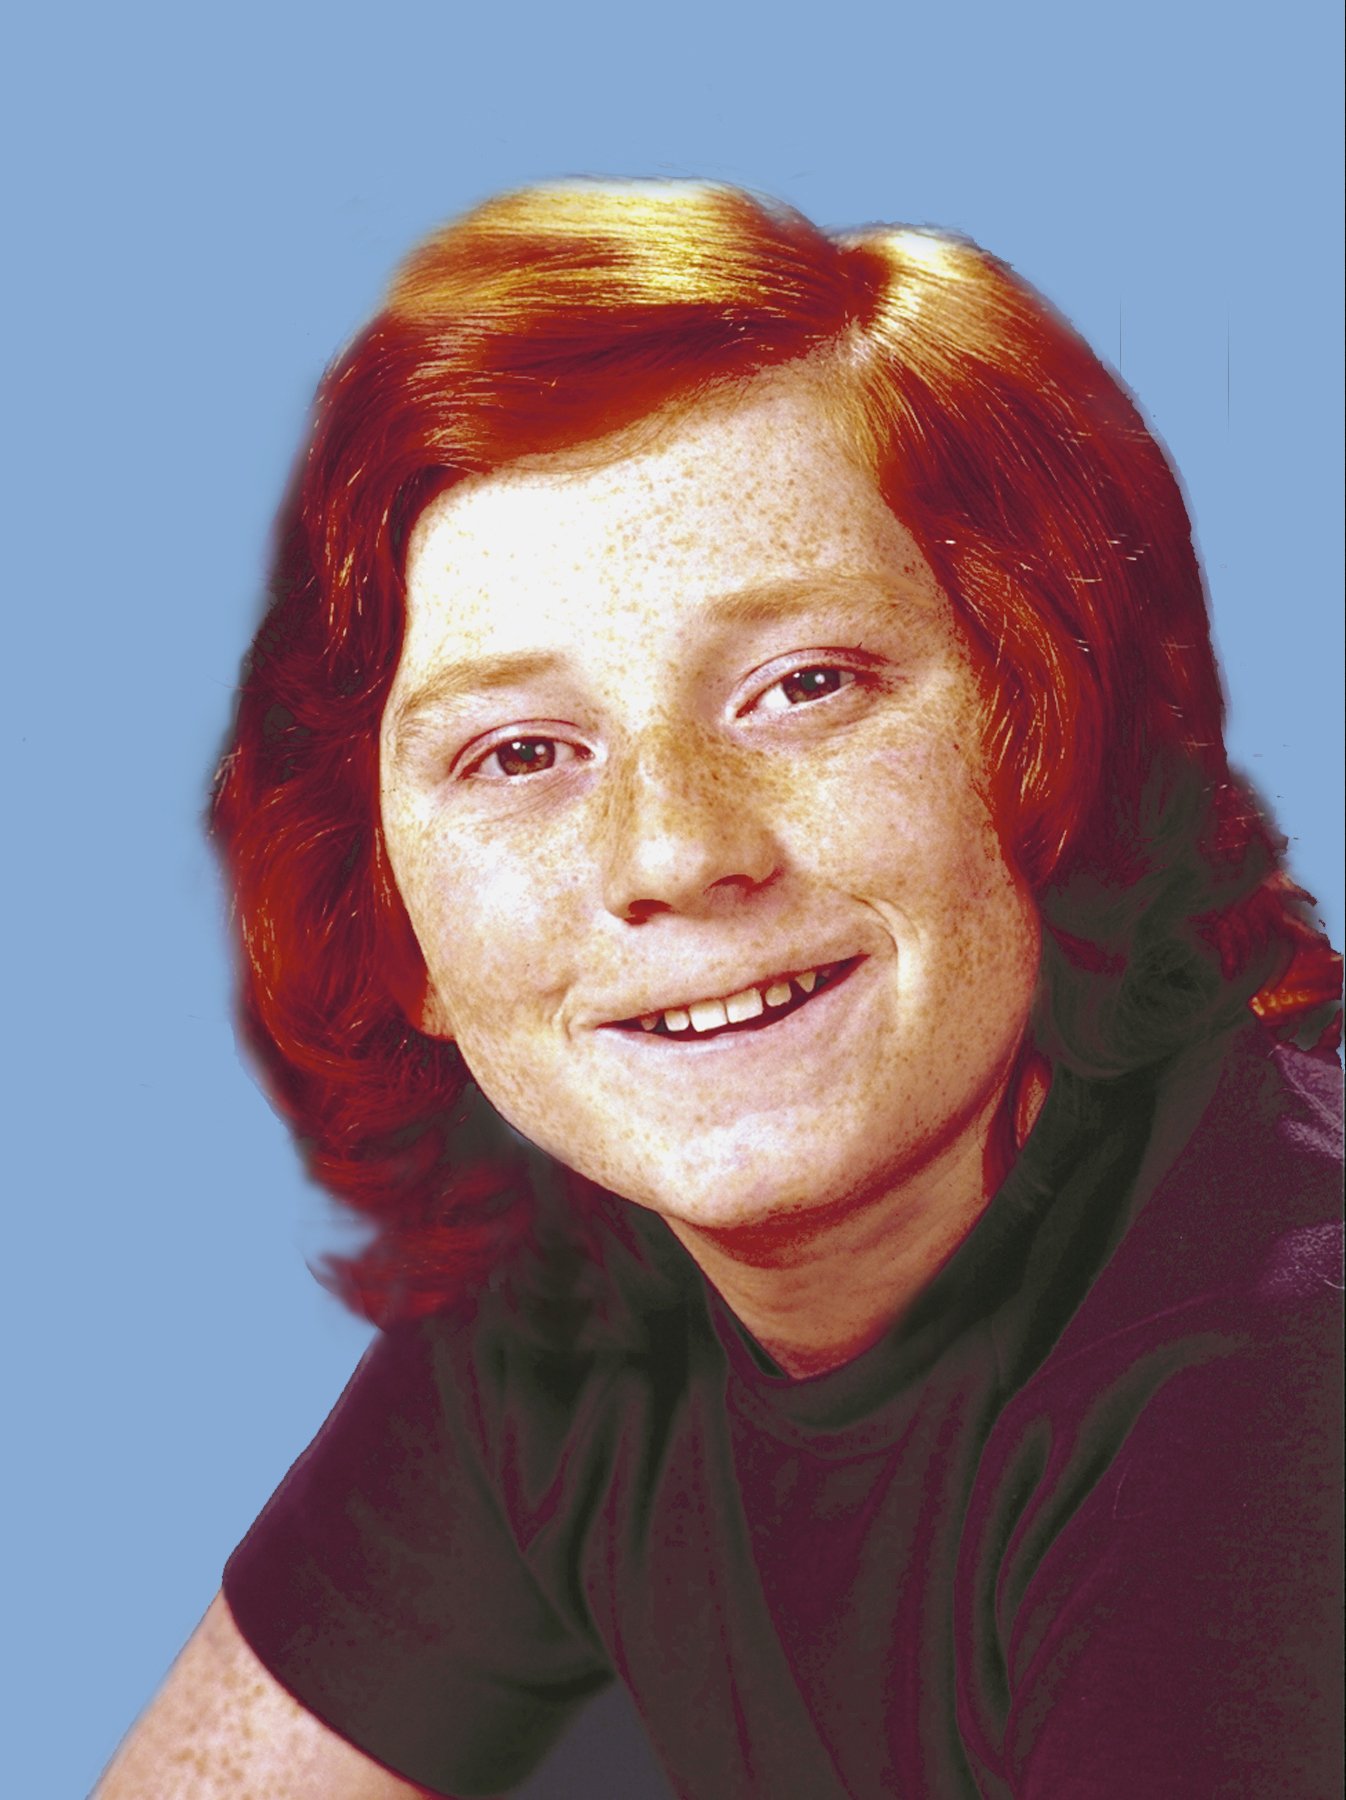 Danny Bonaduce aka Danny Partridge from "The Partridge Family" | Source: Getty Images